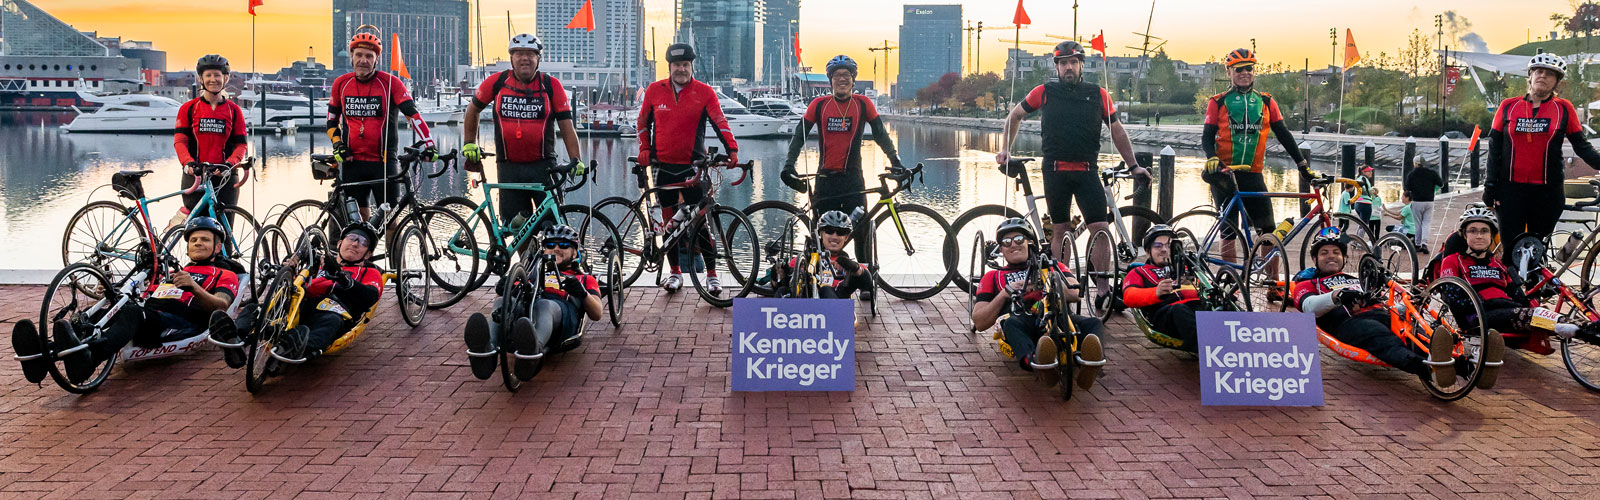 Bicyclists and hand cyclists wearing Team Kennedy Krieger apparel line up behind two purple signs that read Team Kennedy Krieger. Baltimore's skyline and inner harbor are in the background.